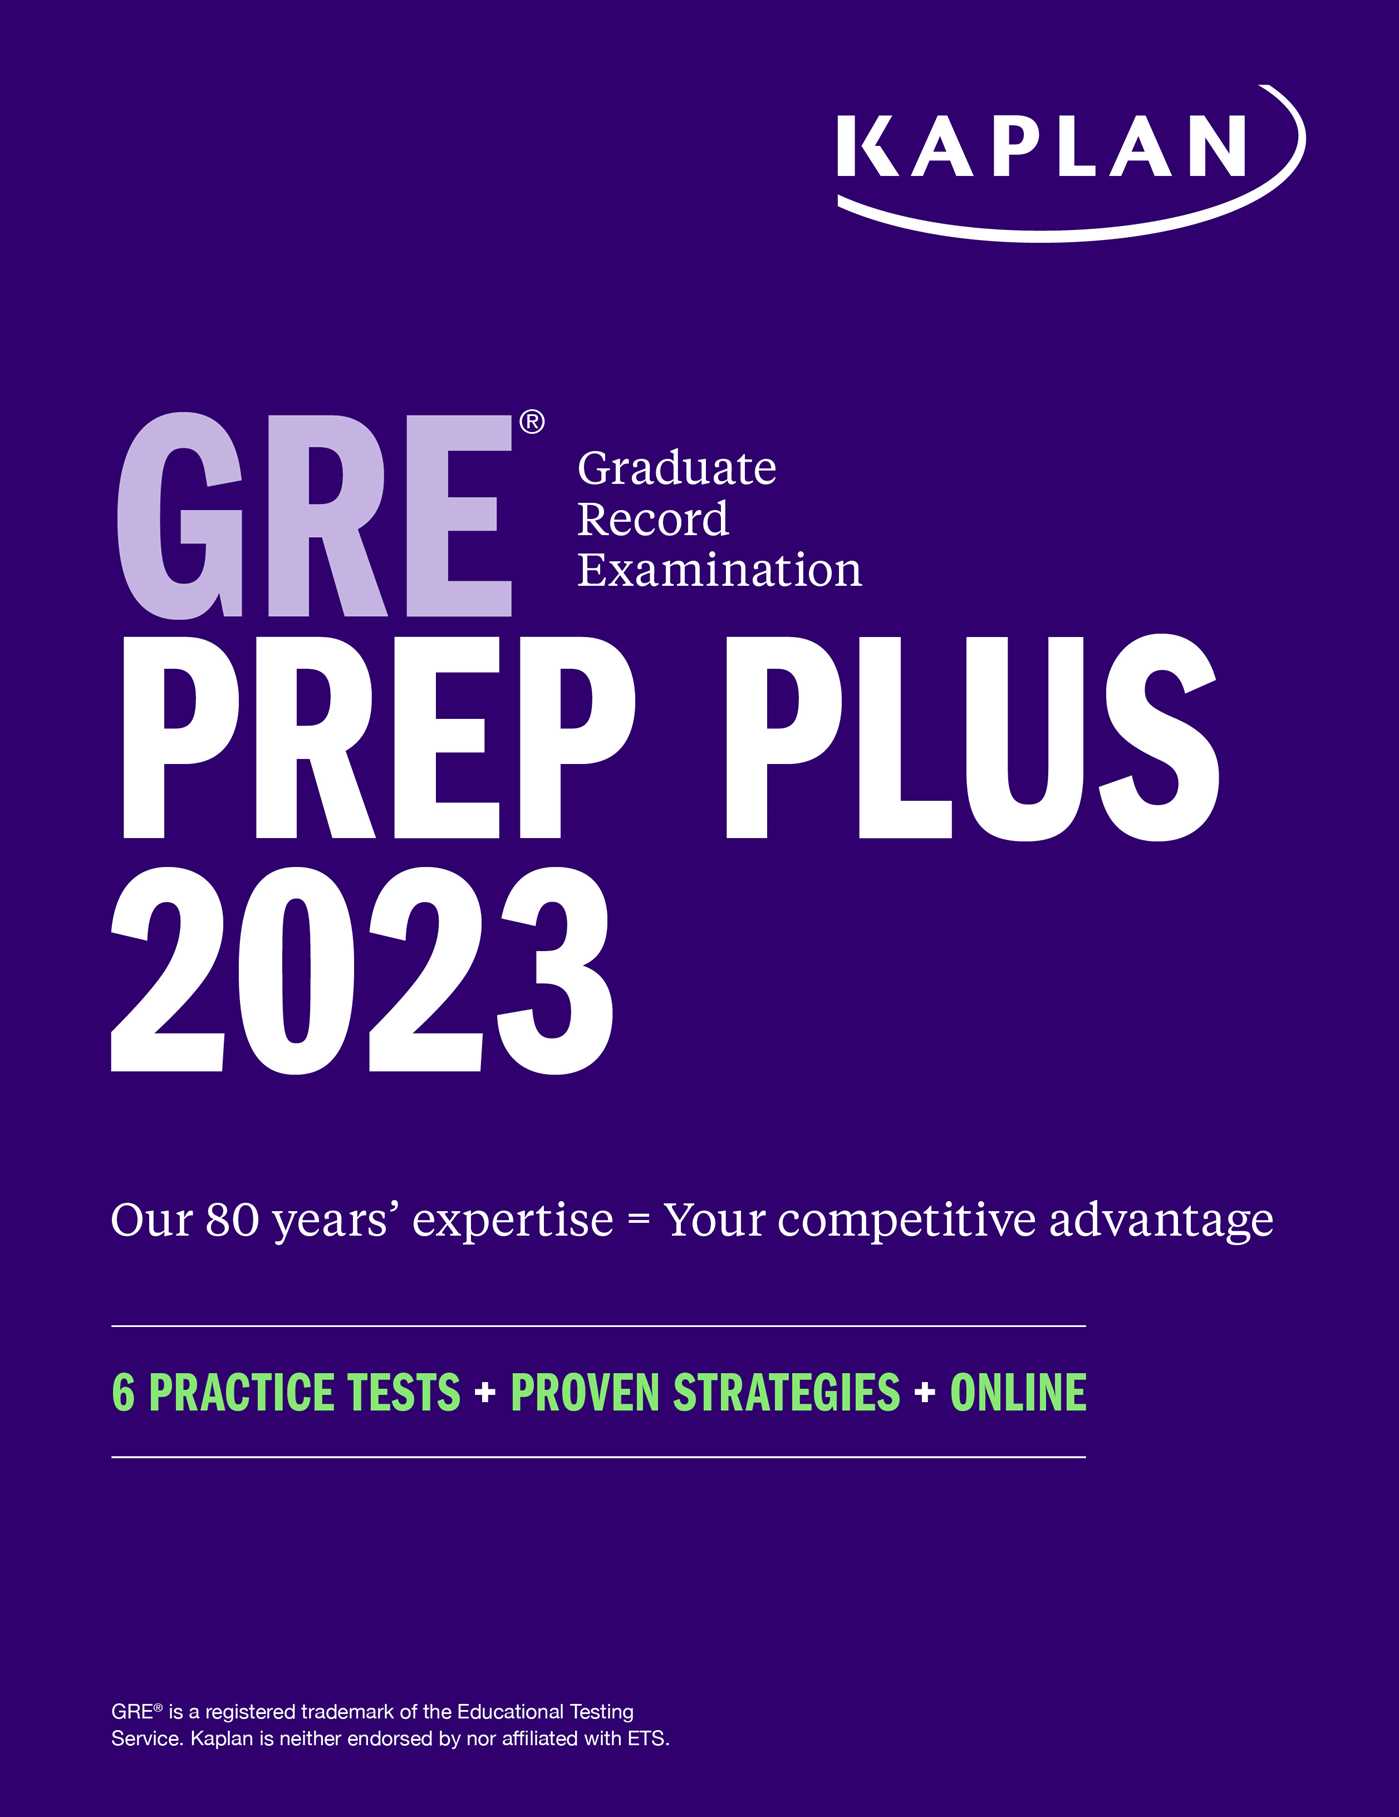 GRE Prep Plus 2023, Includes 6 Practice Tests, Online Study Guide, Proven Strategies to Pass the Exam